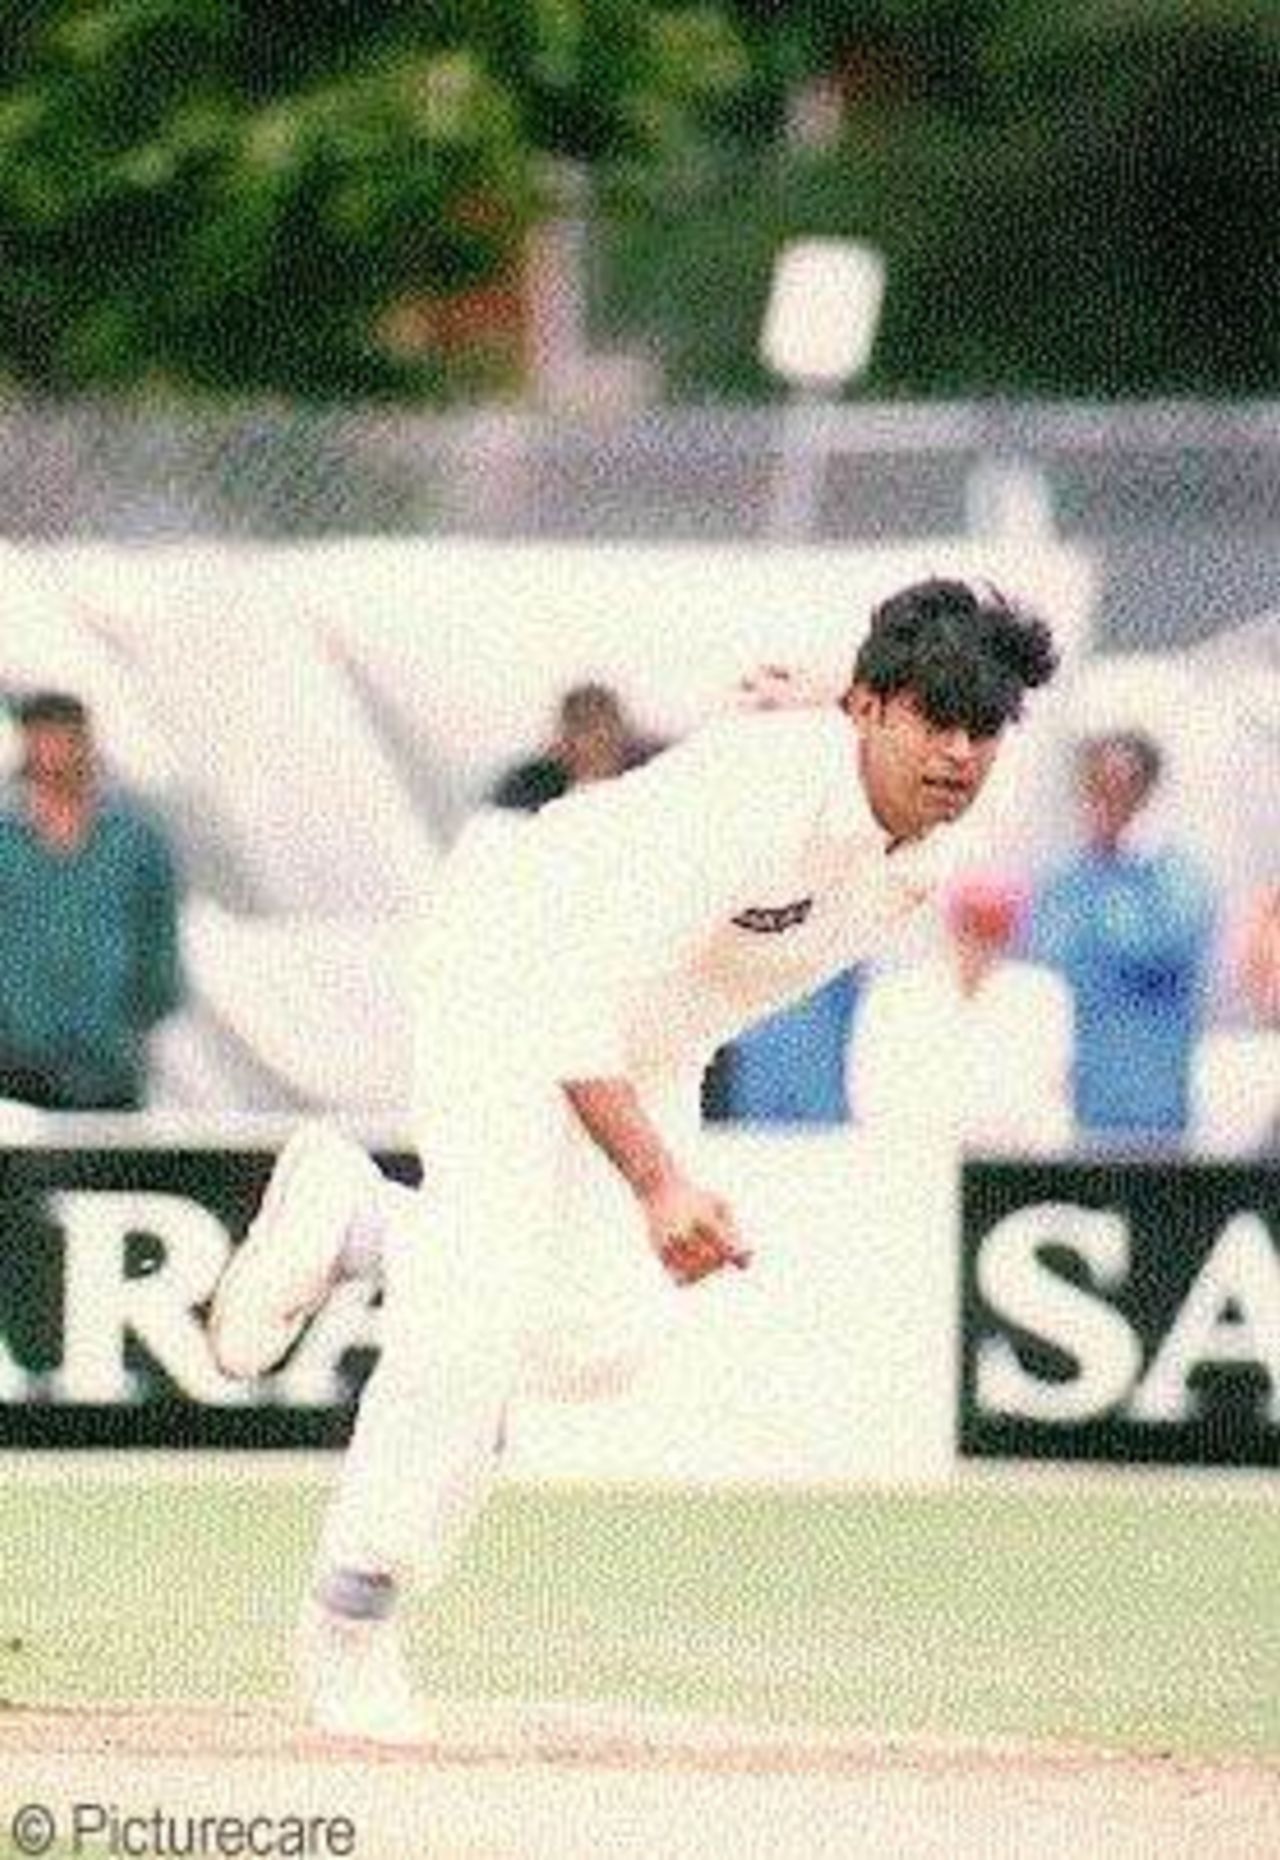 Aaqib Javed in his delivery stride, Pakistan v India, Toronto, Sahara Cup 1997